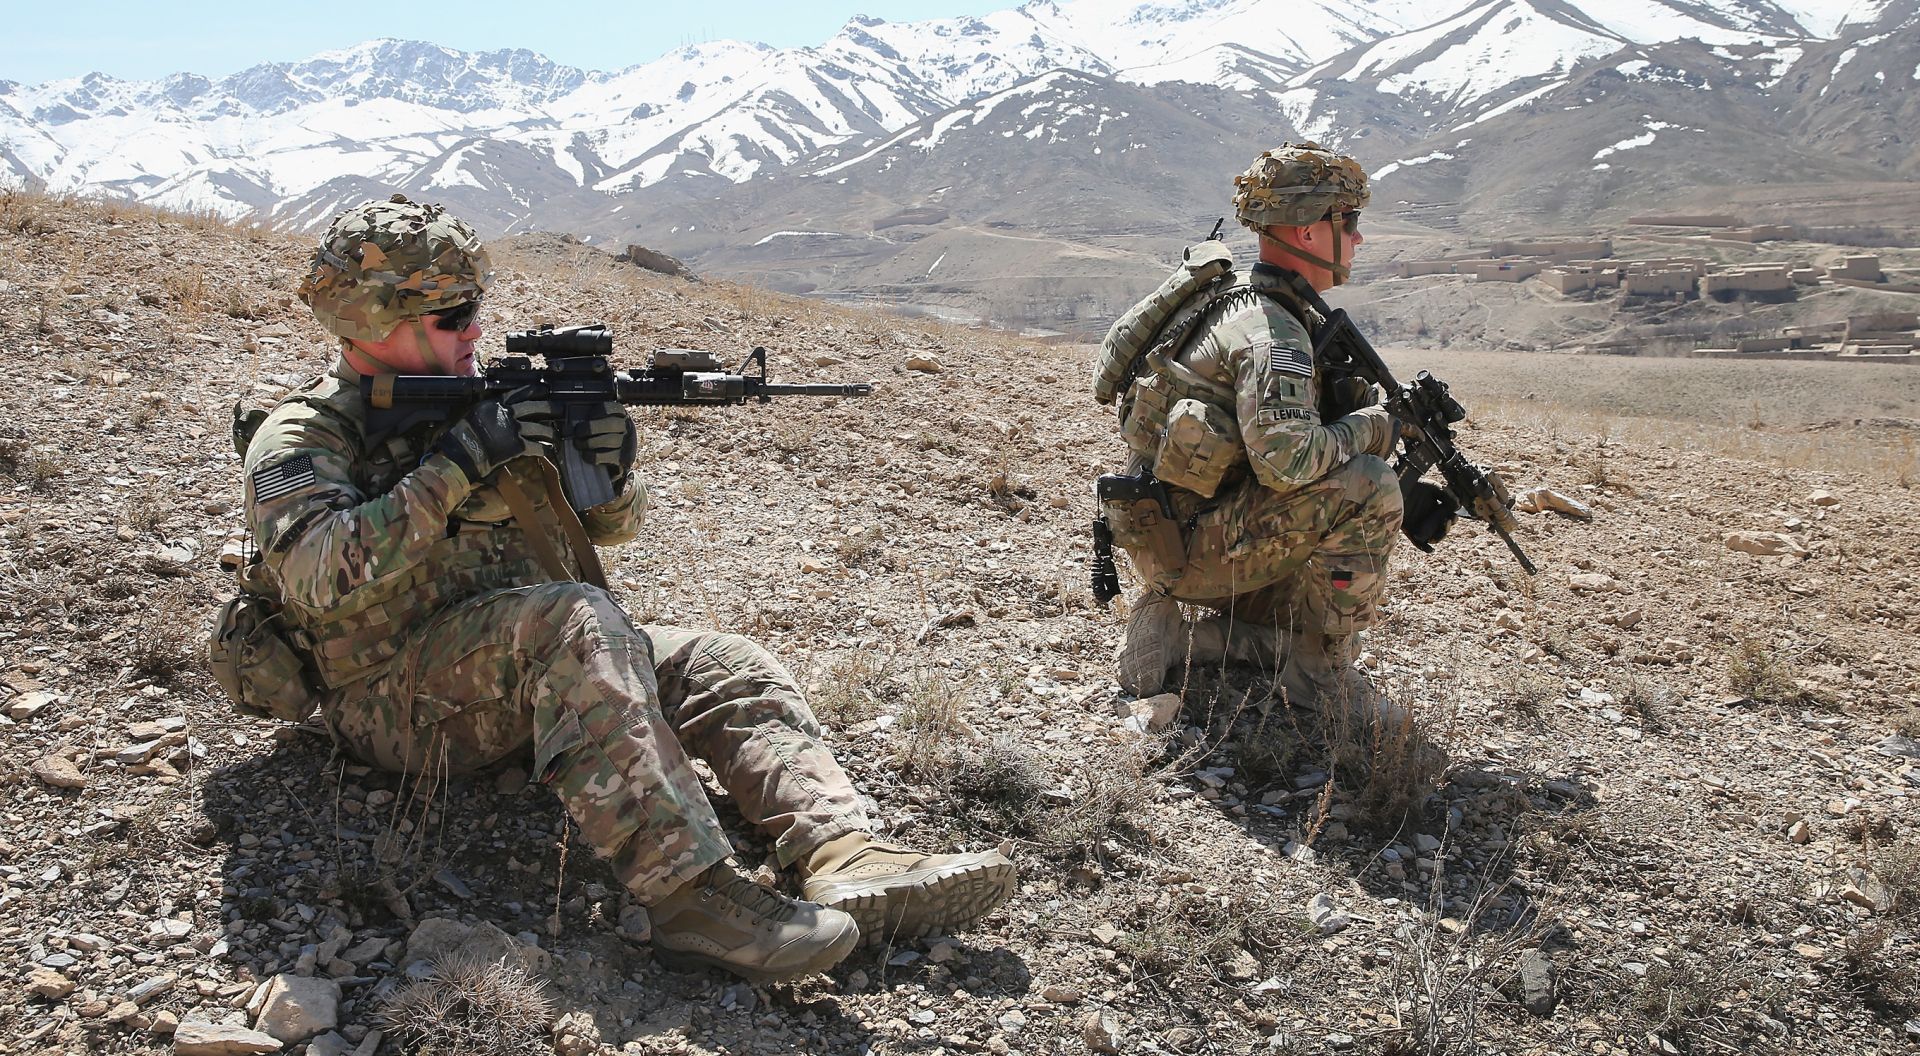 PUL-E ALAM, AFGHANISTAN - MARCH 31:  CSM Brian Hamm from Plano, Texas (L) and 1LT John Levulis from Buffalo, New York with the U.S. Army's 2nd Battalion 87th Infantry Regiment, 3rd Brigade Combat Team, 10th Mountain Division patrol up a mountainside near Forward Operating Base (FOB) Shank on March 31, 2014 near Pul-e Alam, Afghanistan. The primary mission of soldiers with the 10th Mountain Division stationed at FOB Shank is to advise and assist Afghan National Security Forces in the region. Security is at a heightened state throughout Afghanistan as the nation prepares for the April 5th presidential election.  (Photo by Scott Olson/Getty Images)